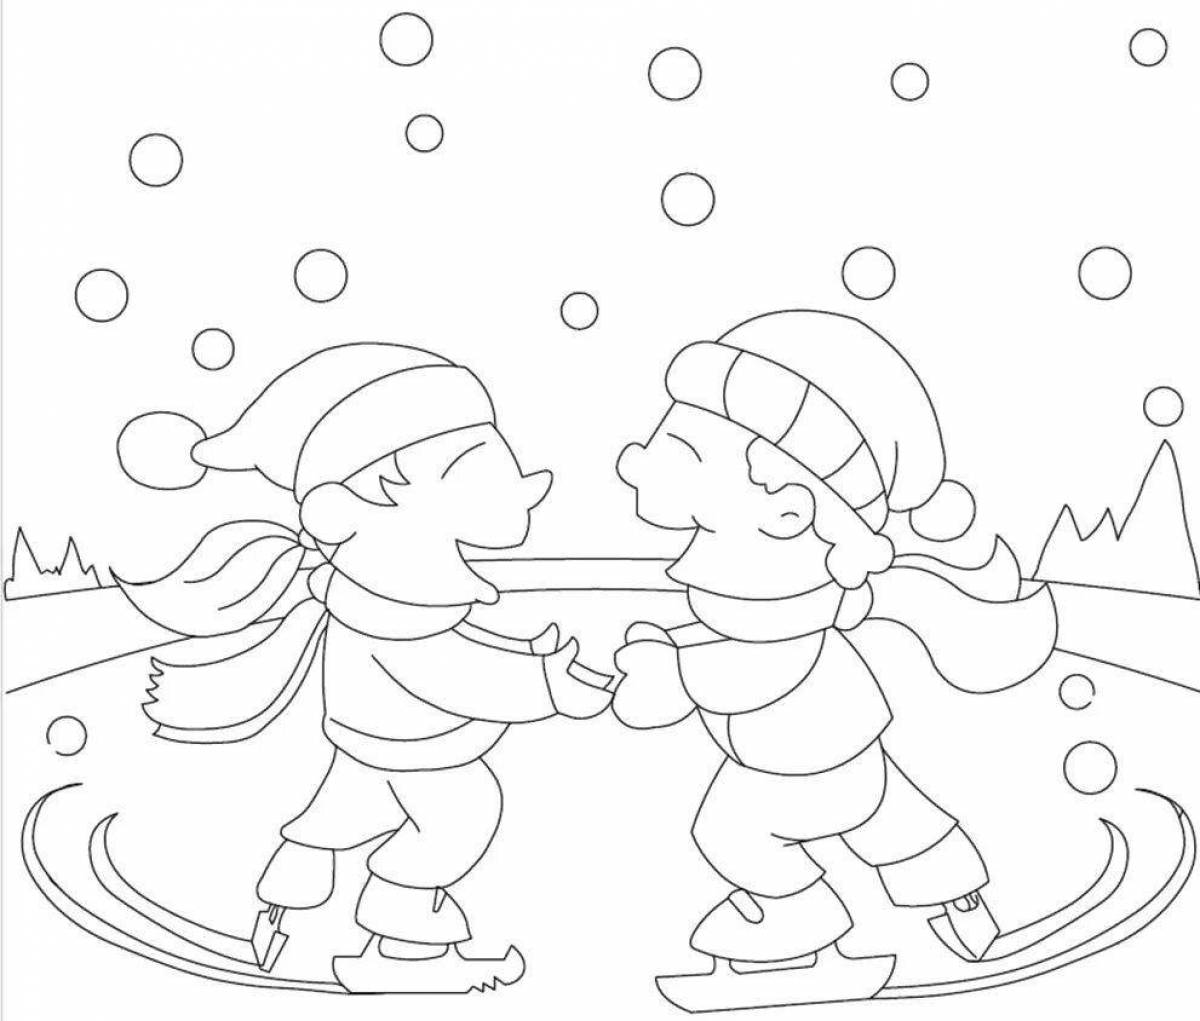 Coloring pages for children on skates